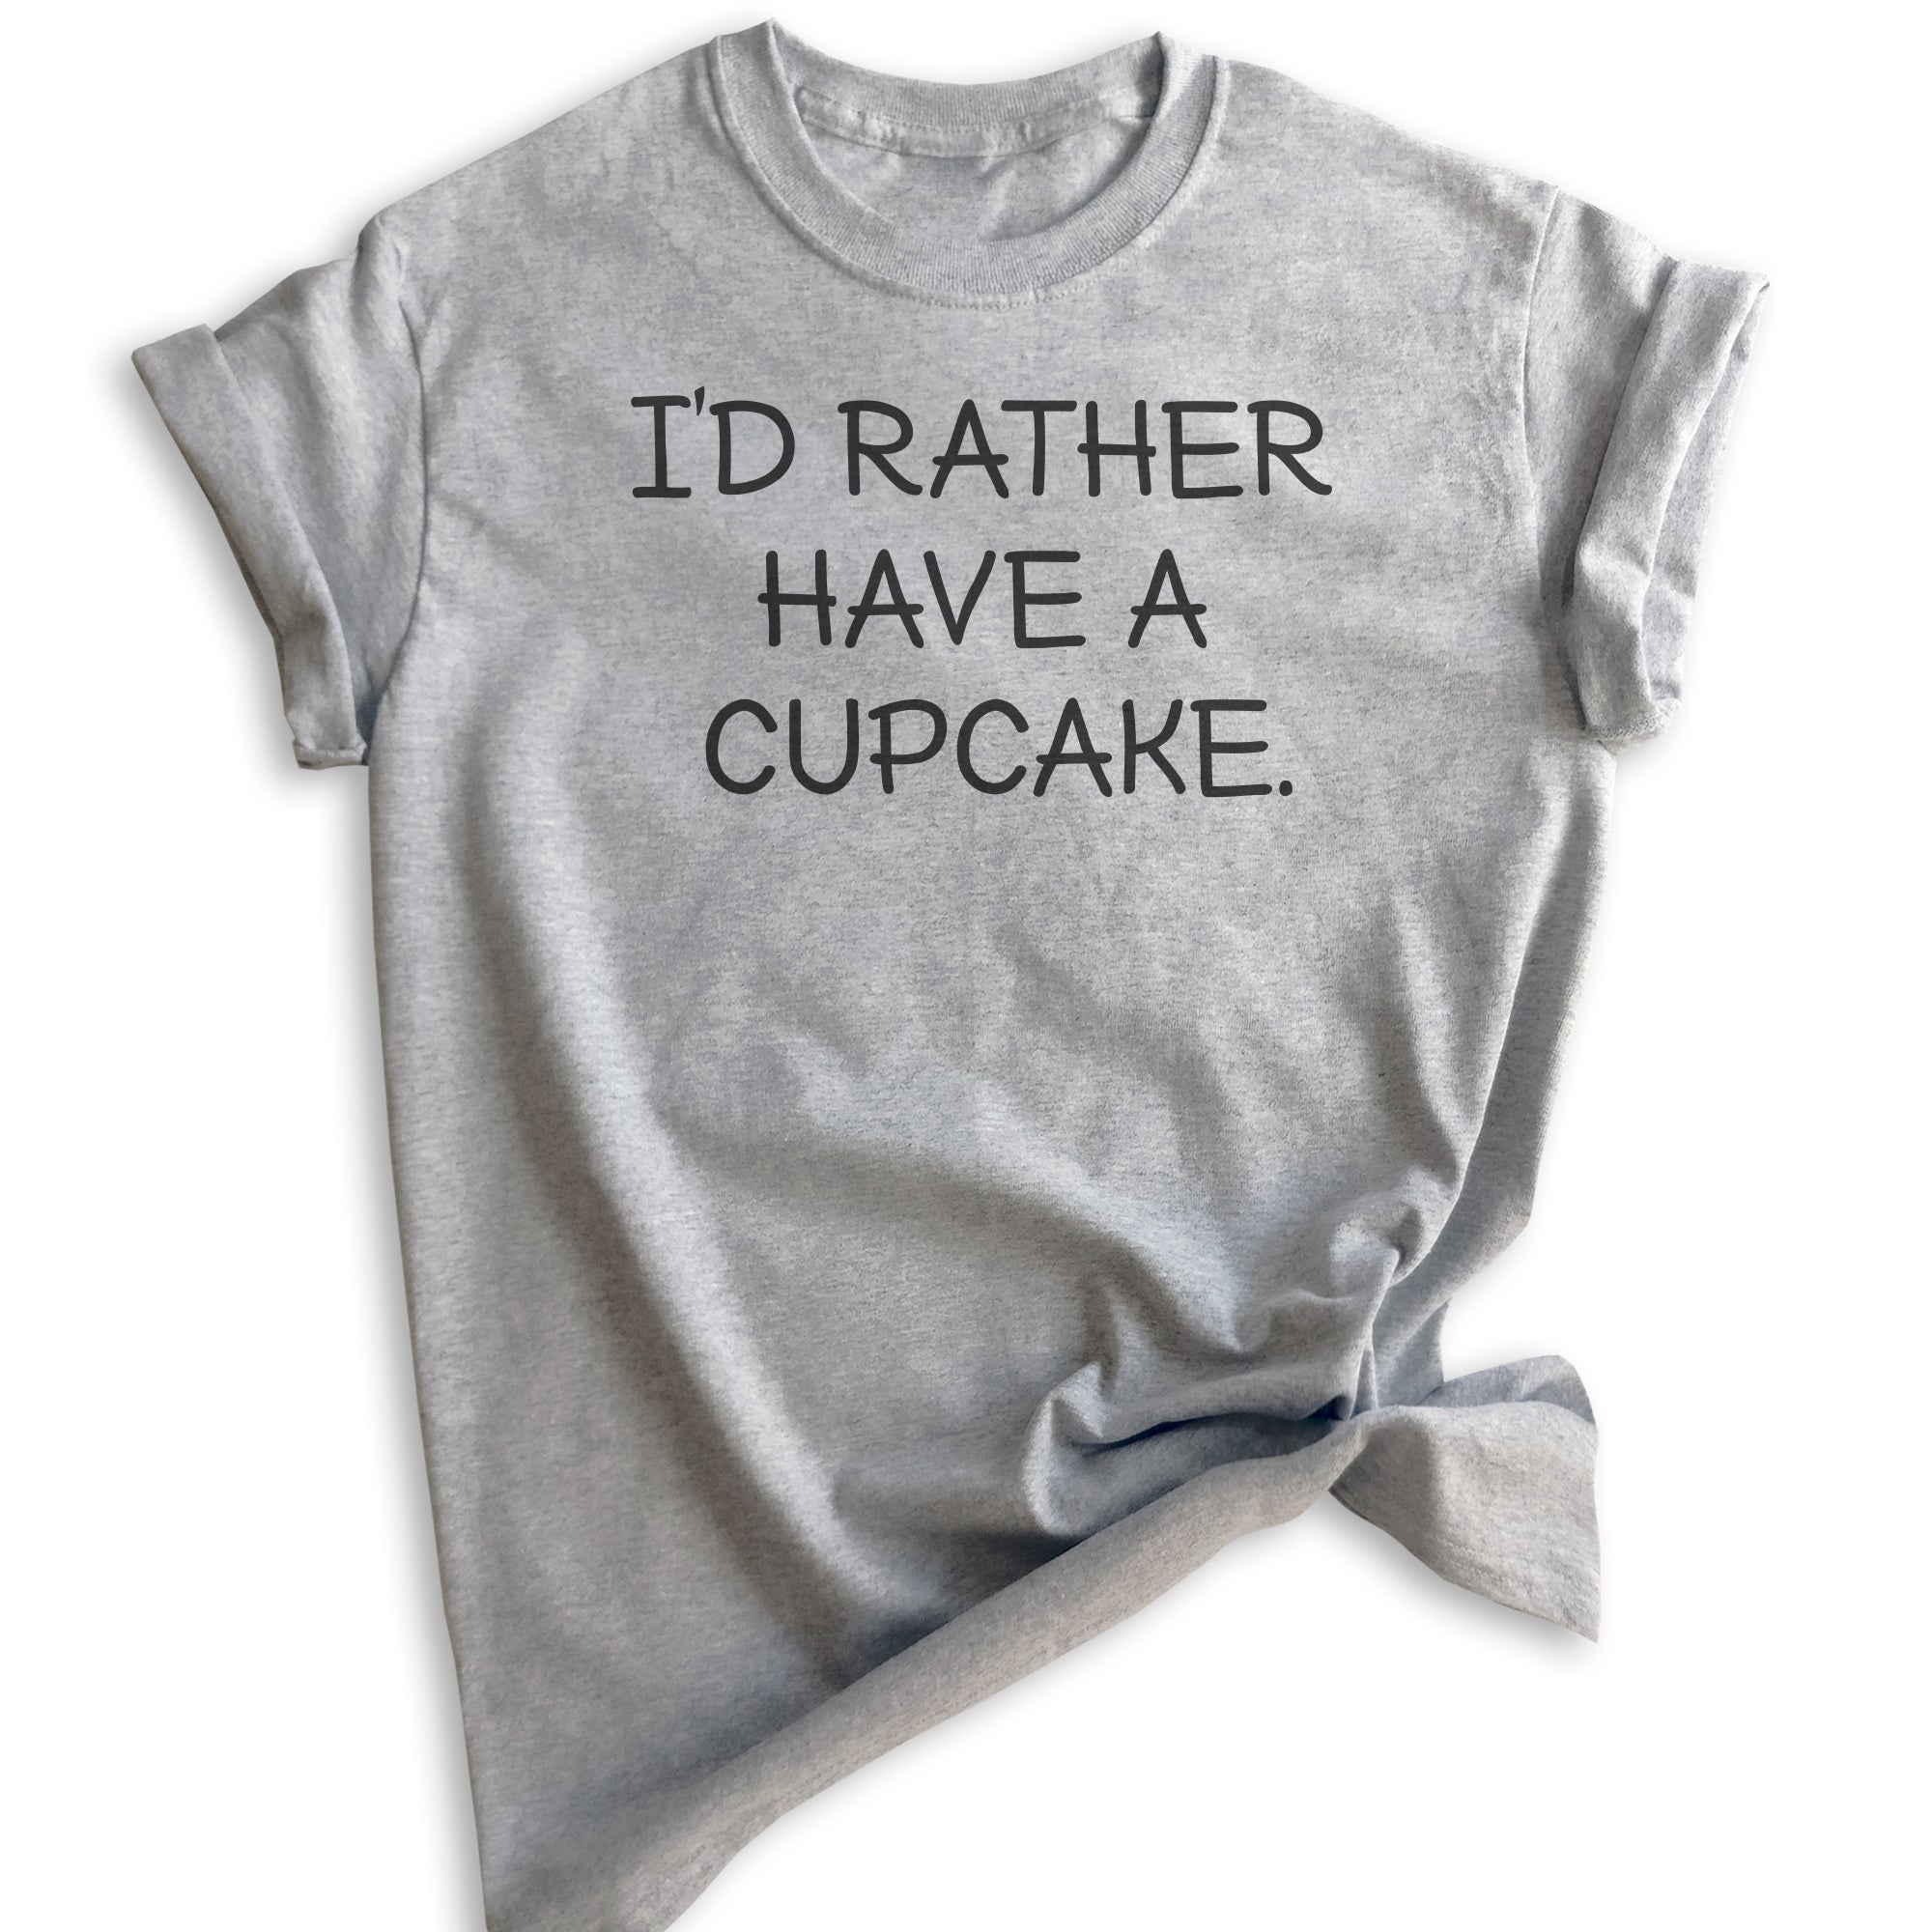 I'd Rather Have A Cupcake T-shirt, Unisex Women's Men's Shirt, Cupcake T-shirt, Heather Gray, X-Large - image 1 of 6